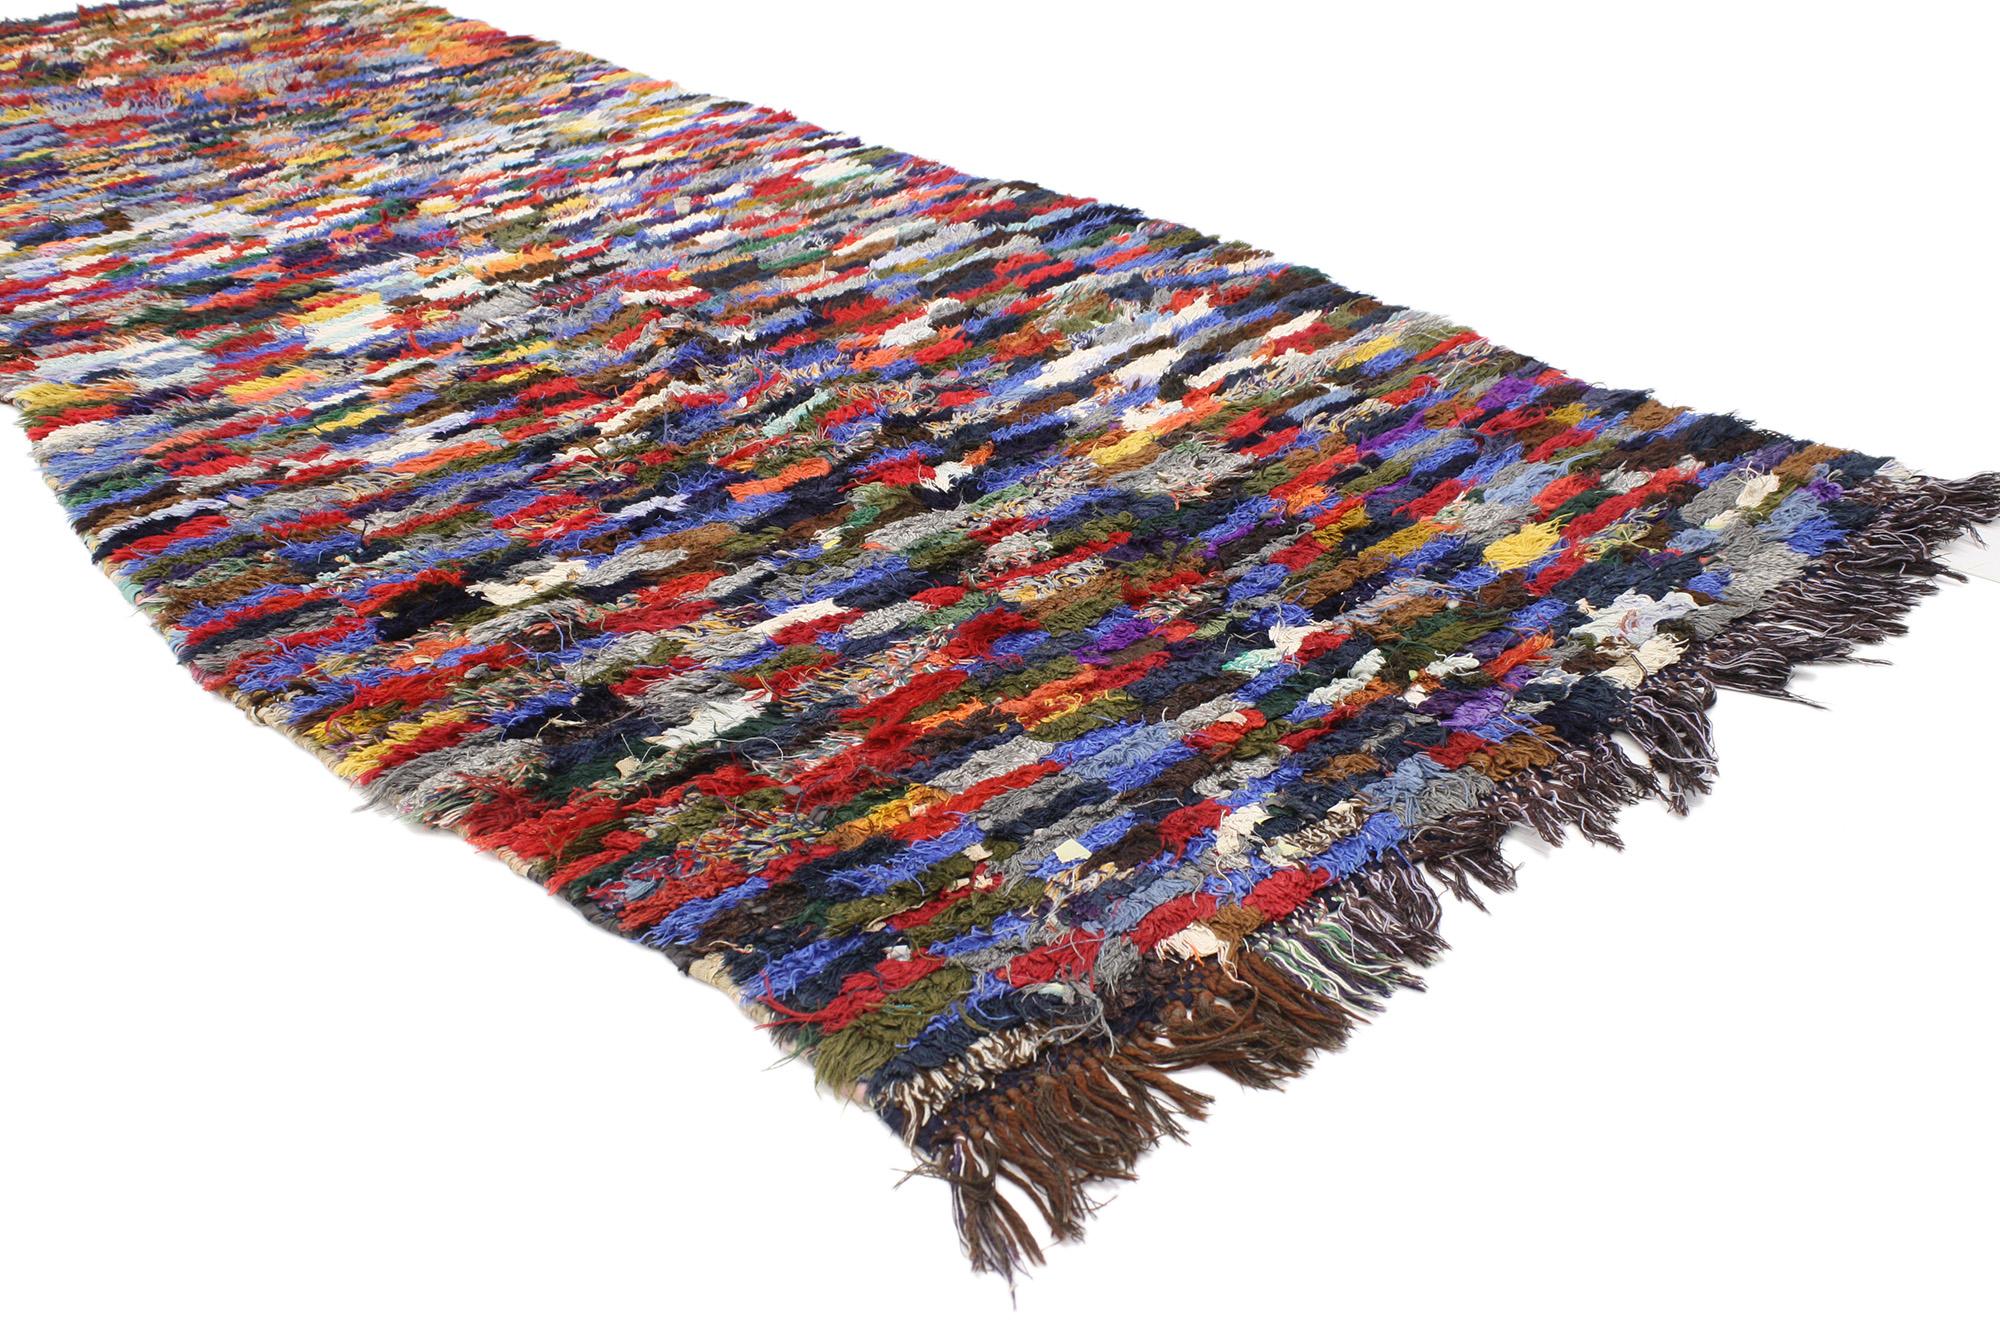 20581 Vintage Boucherouite Boujad Moroccan Rag Rug, 03'00 x 08'06. Celebrate the vibrant spirit of Boujad Boucherouite rugs, originating from the lively city of Boujad in the Khouribga region. These Moroccan rugs are cherished for their eccentric